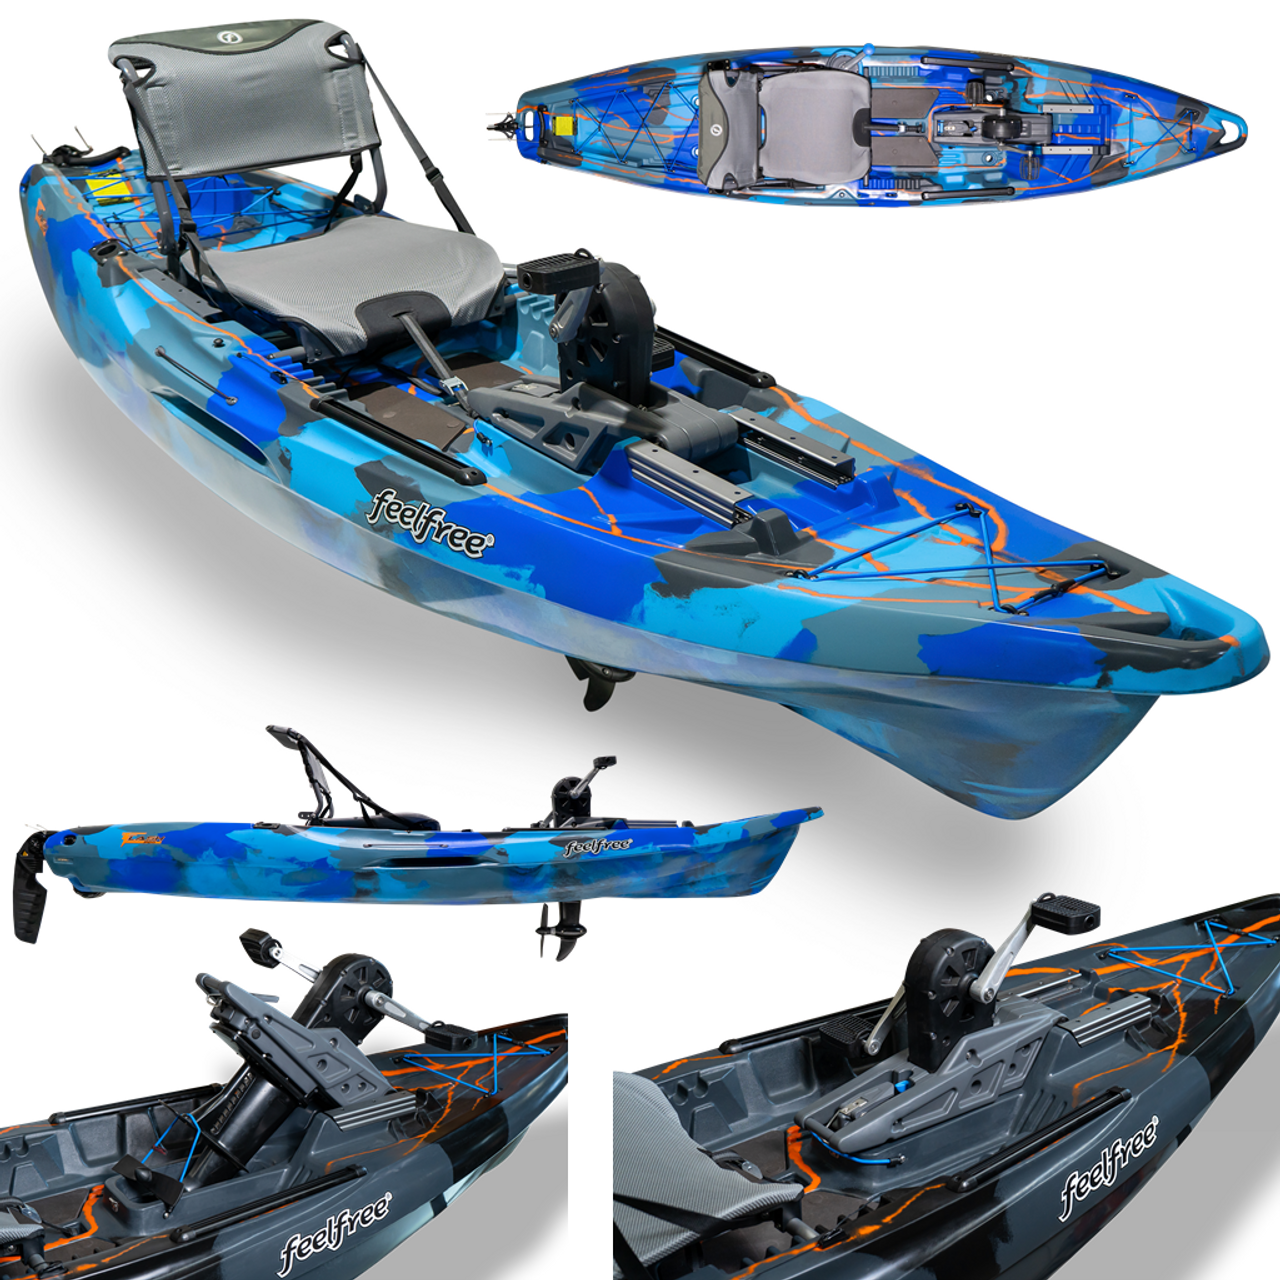 https://cdn11.bigcommerce.com/s-f3xbgyp2hq/images/stencil/1280x1280/products/2667/22121/FeelFree_Flash_Pedal_Drive_Fishing_Kayak_-_Kayak_City_Electric_Blue__91077.1652829443.png?c=2